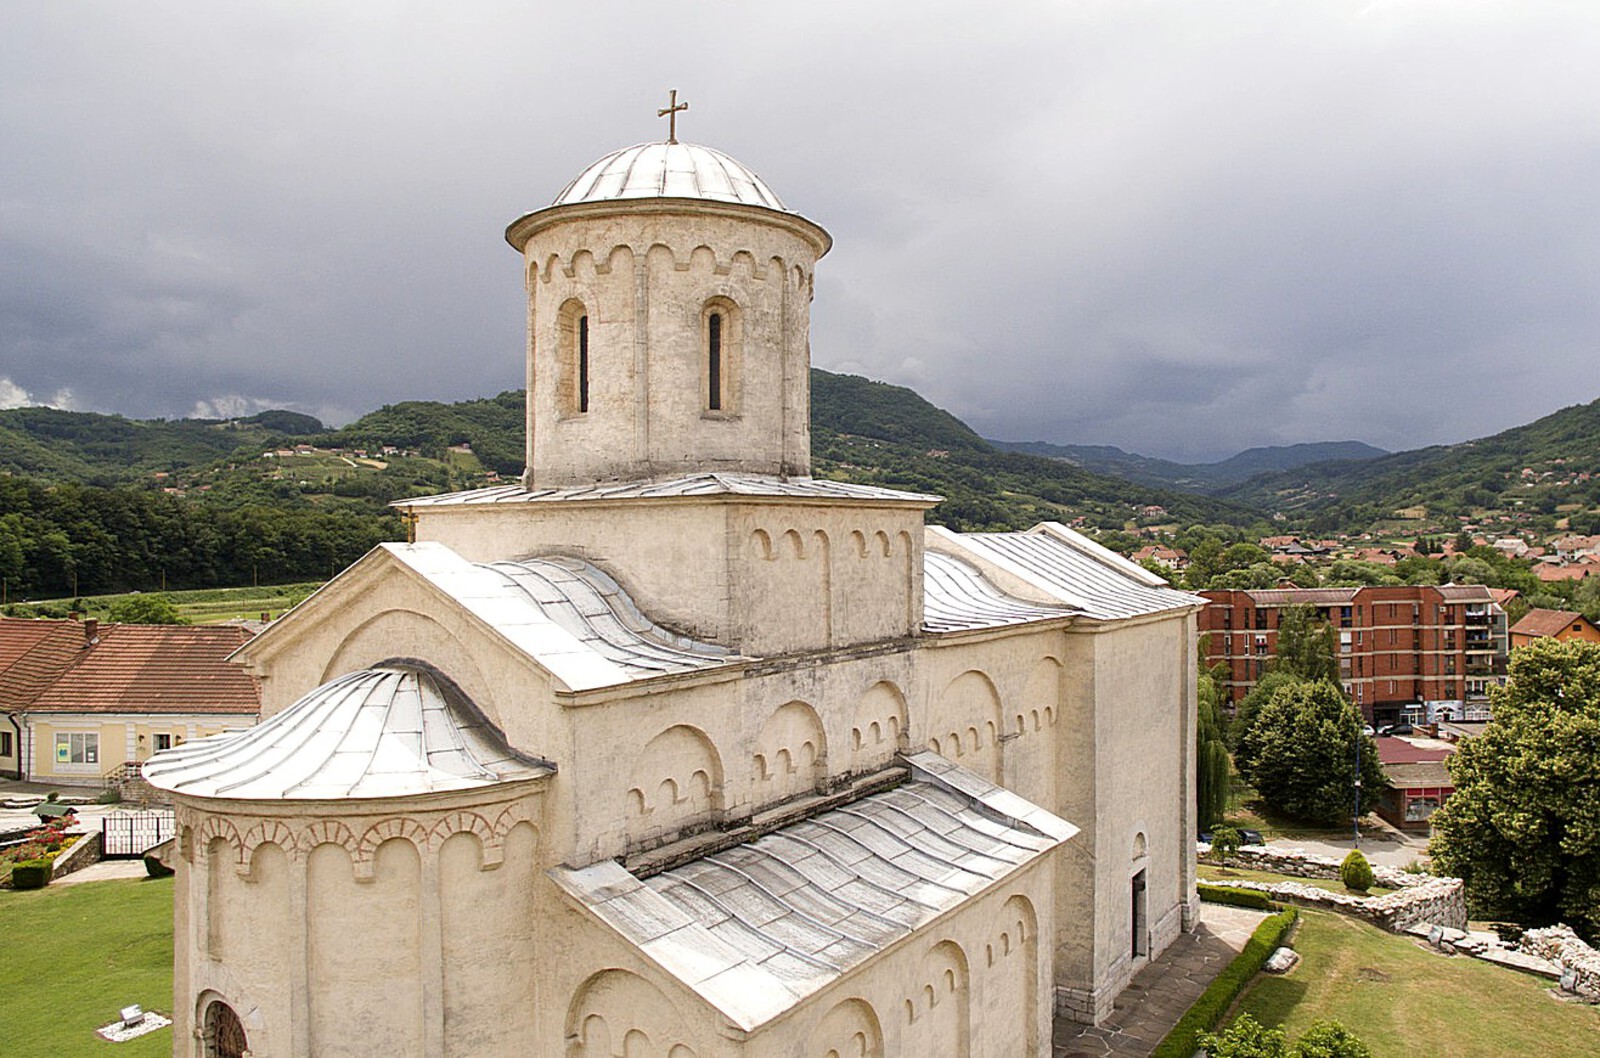 Upper zone and the roof cover of the church